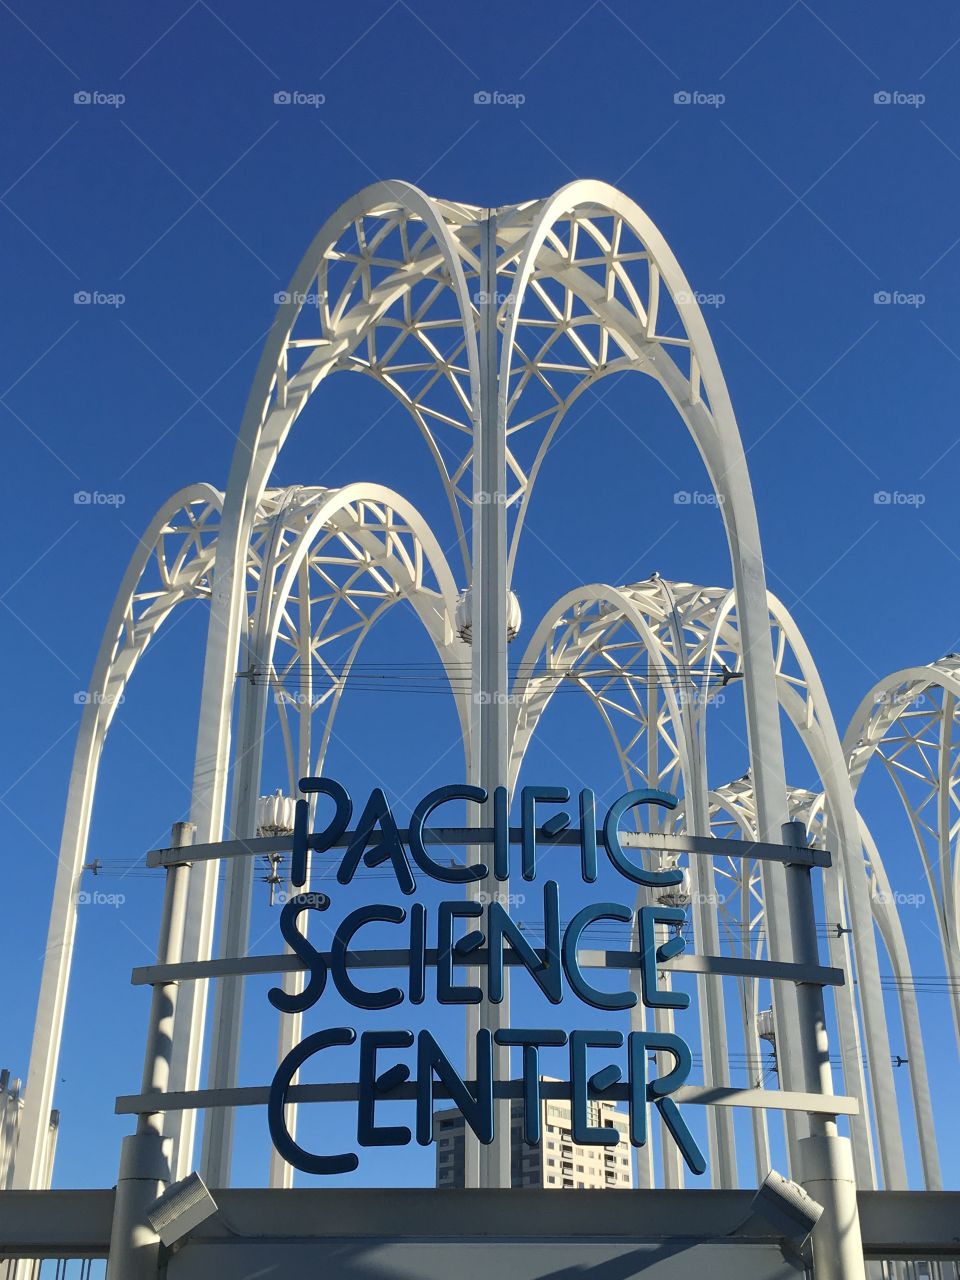 Pacific Science Center 